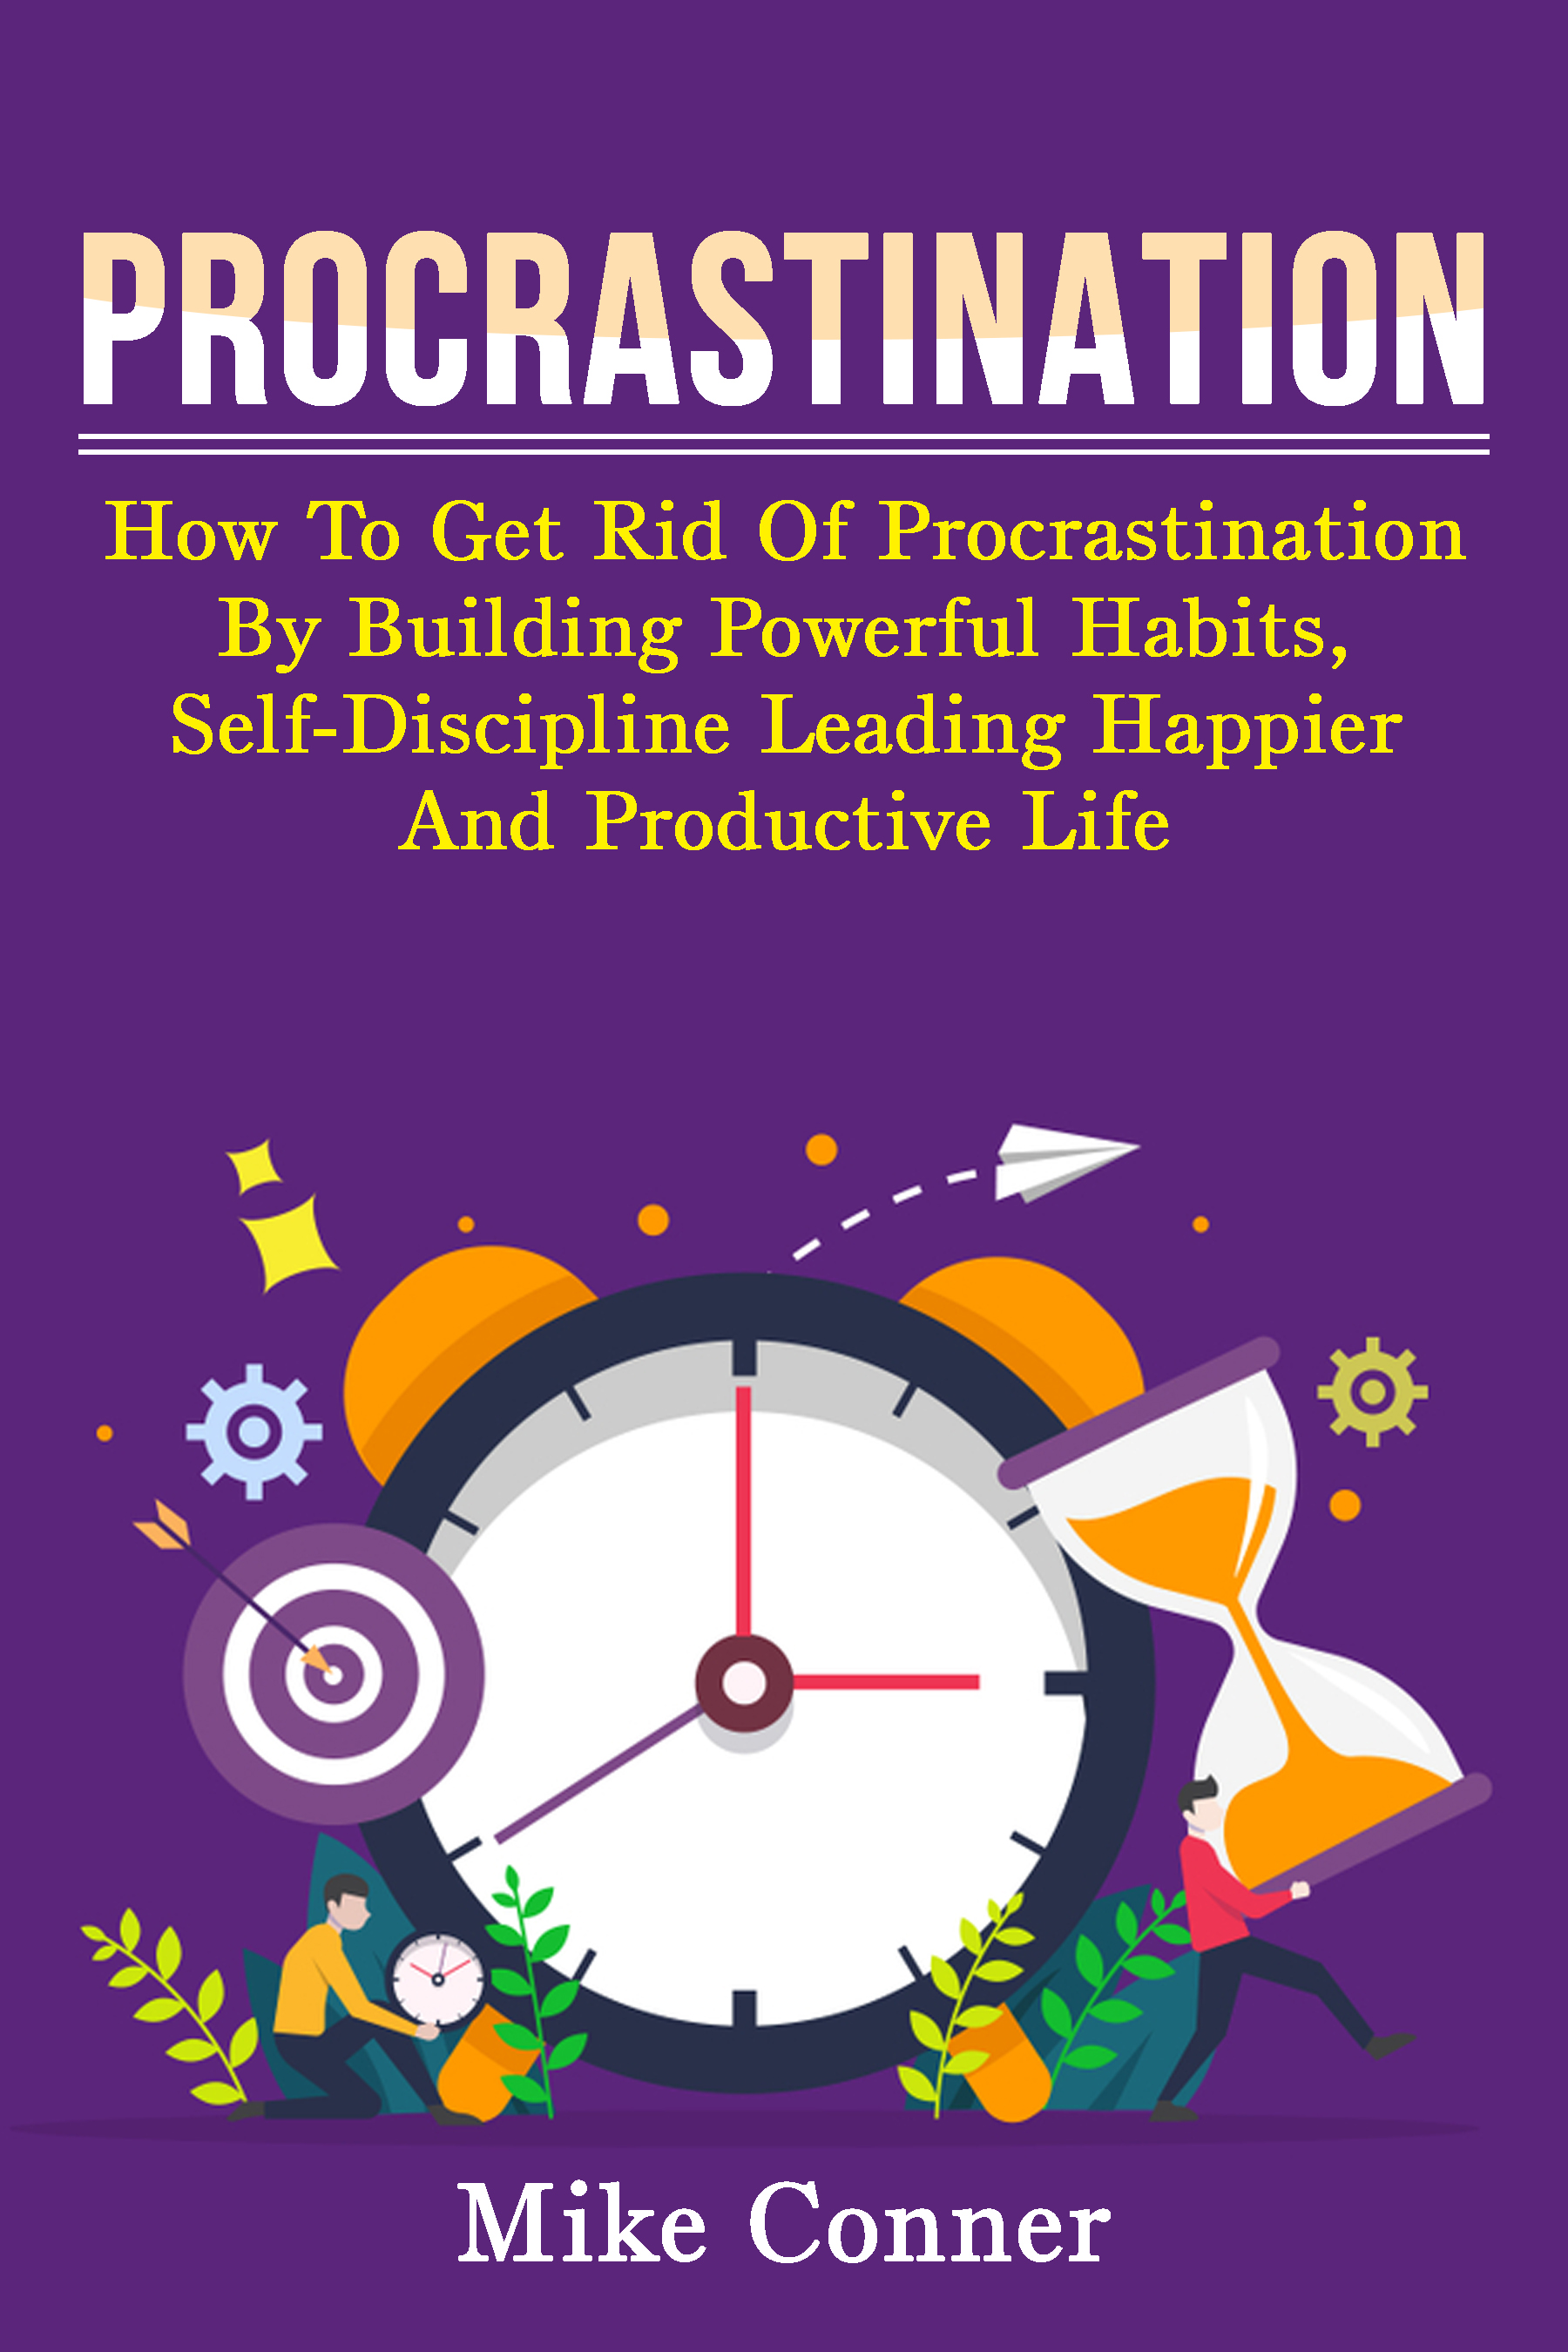 FREE: Procrastination: How To Get Rid Of Procrastination By Building Powerful Habits, Self-Discipline, Leading Happier And Productive Life! by Mike Conner